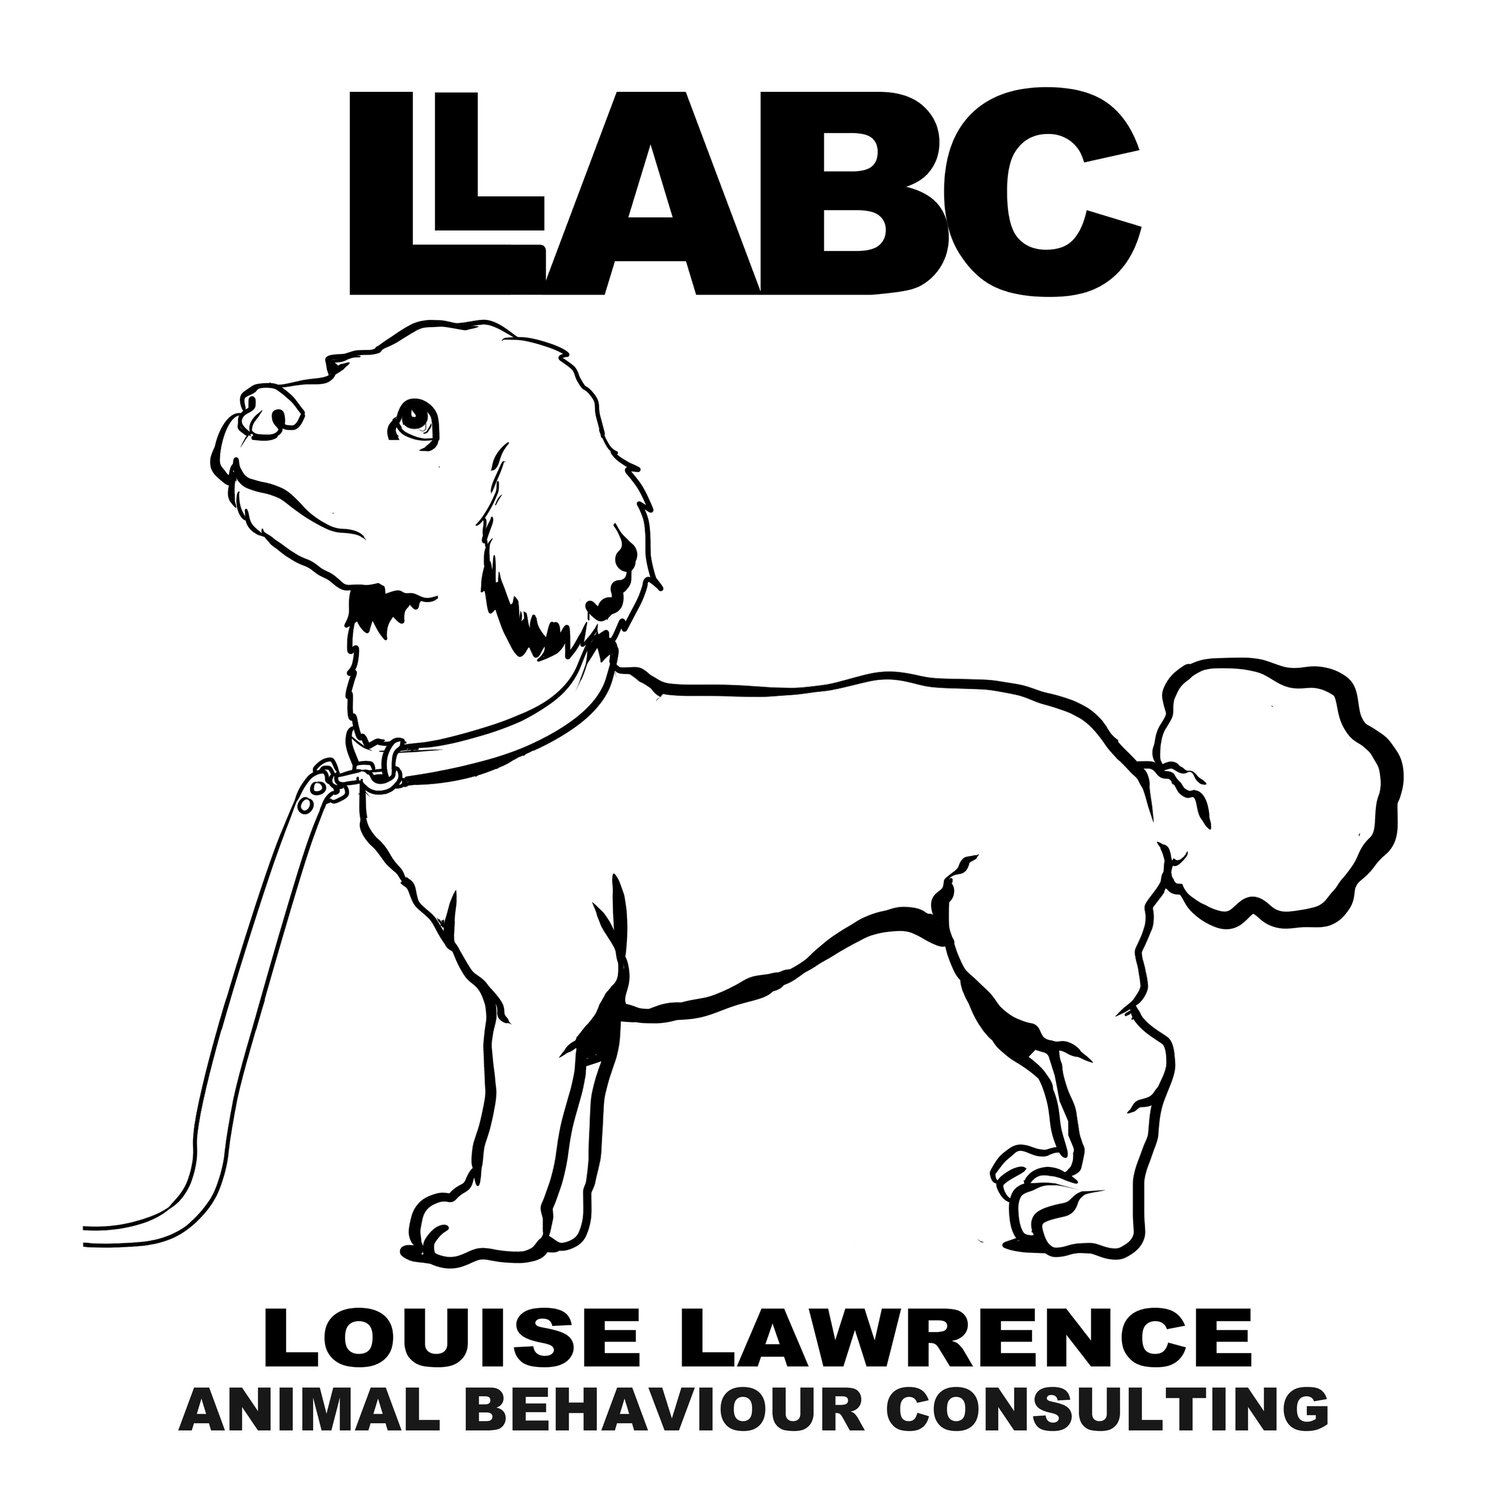 Louise Lawrence Animal Behaviour Consulting